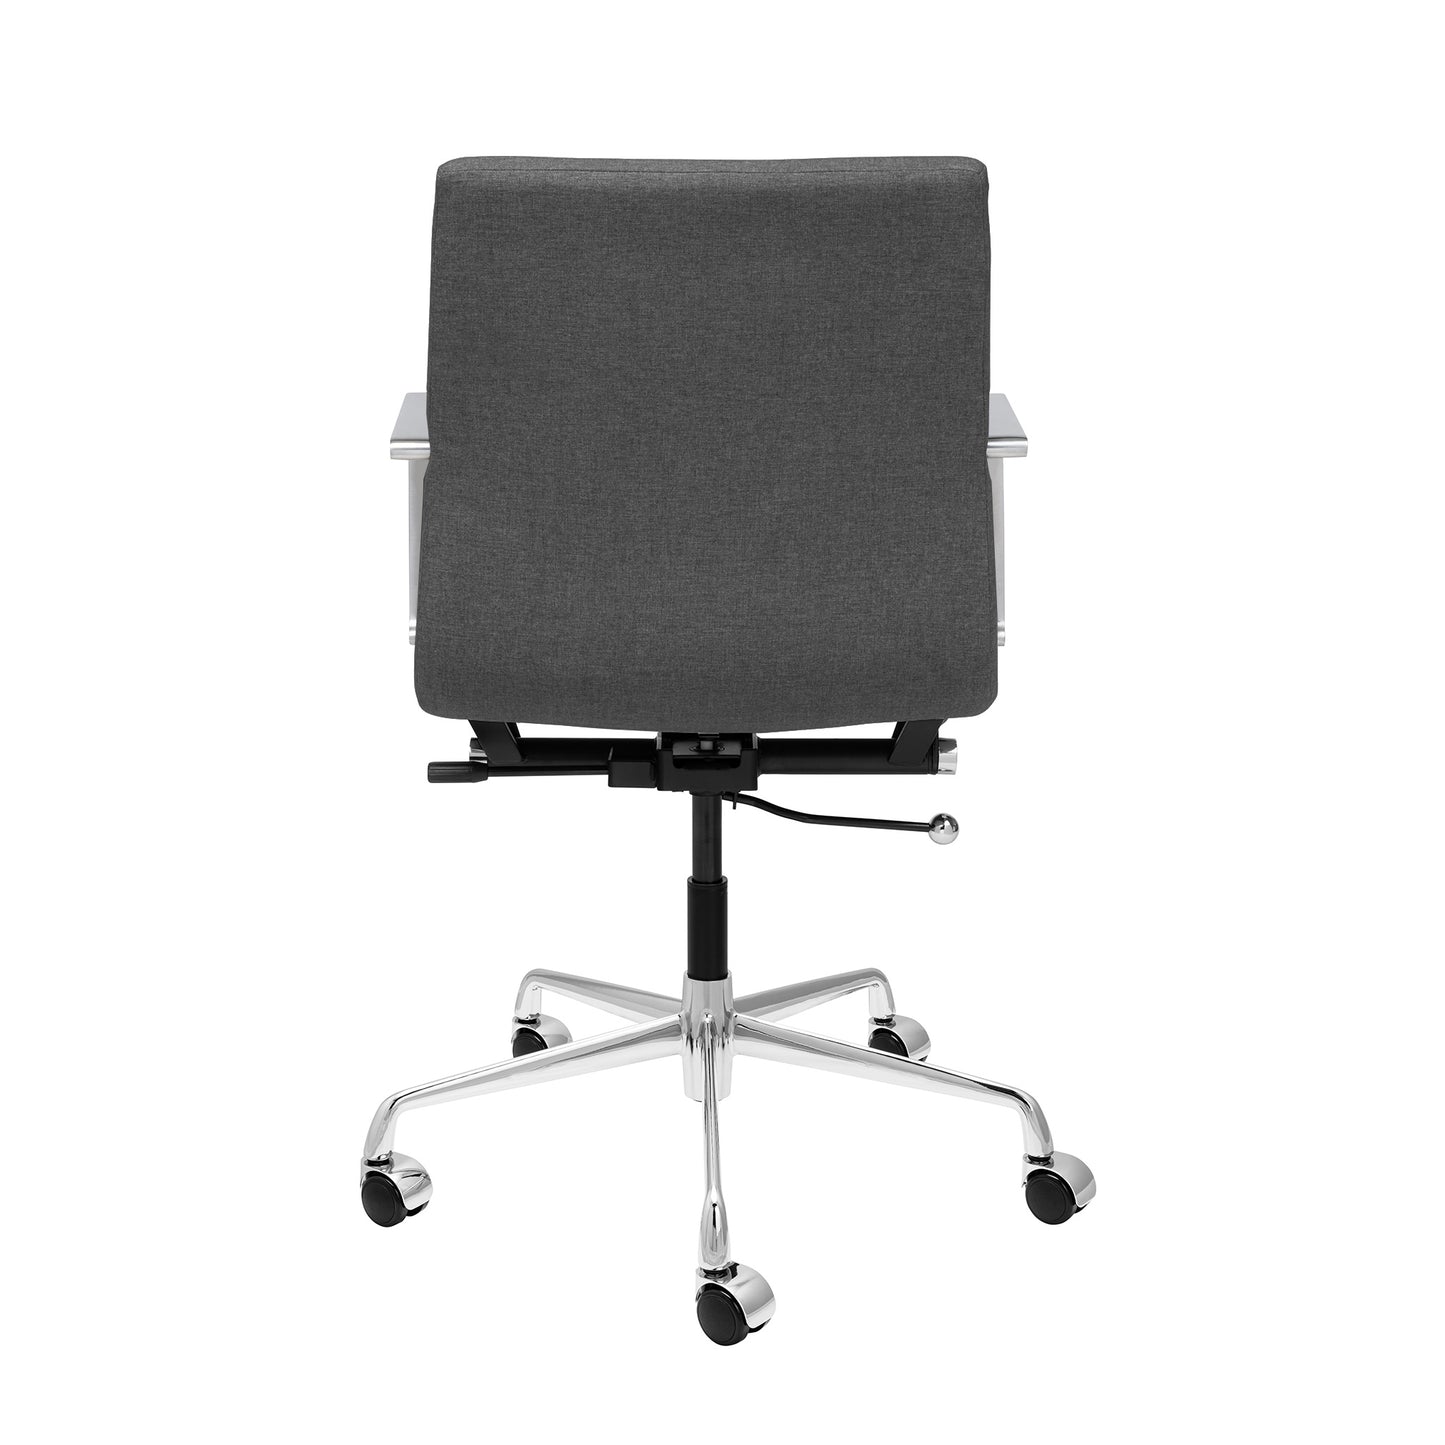 SOHO II Ribbed Management Chair (Charcoal Fabric)